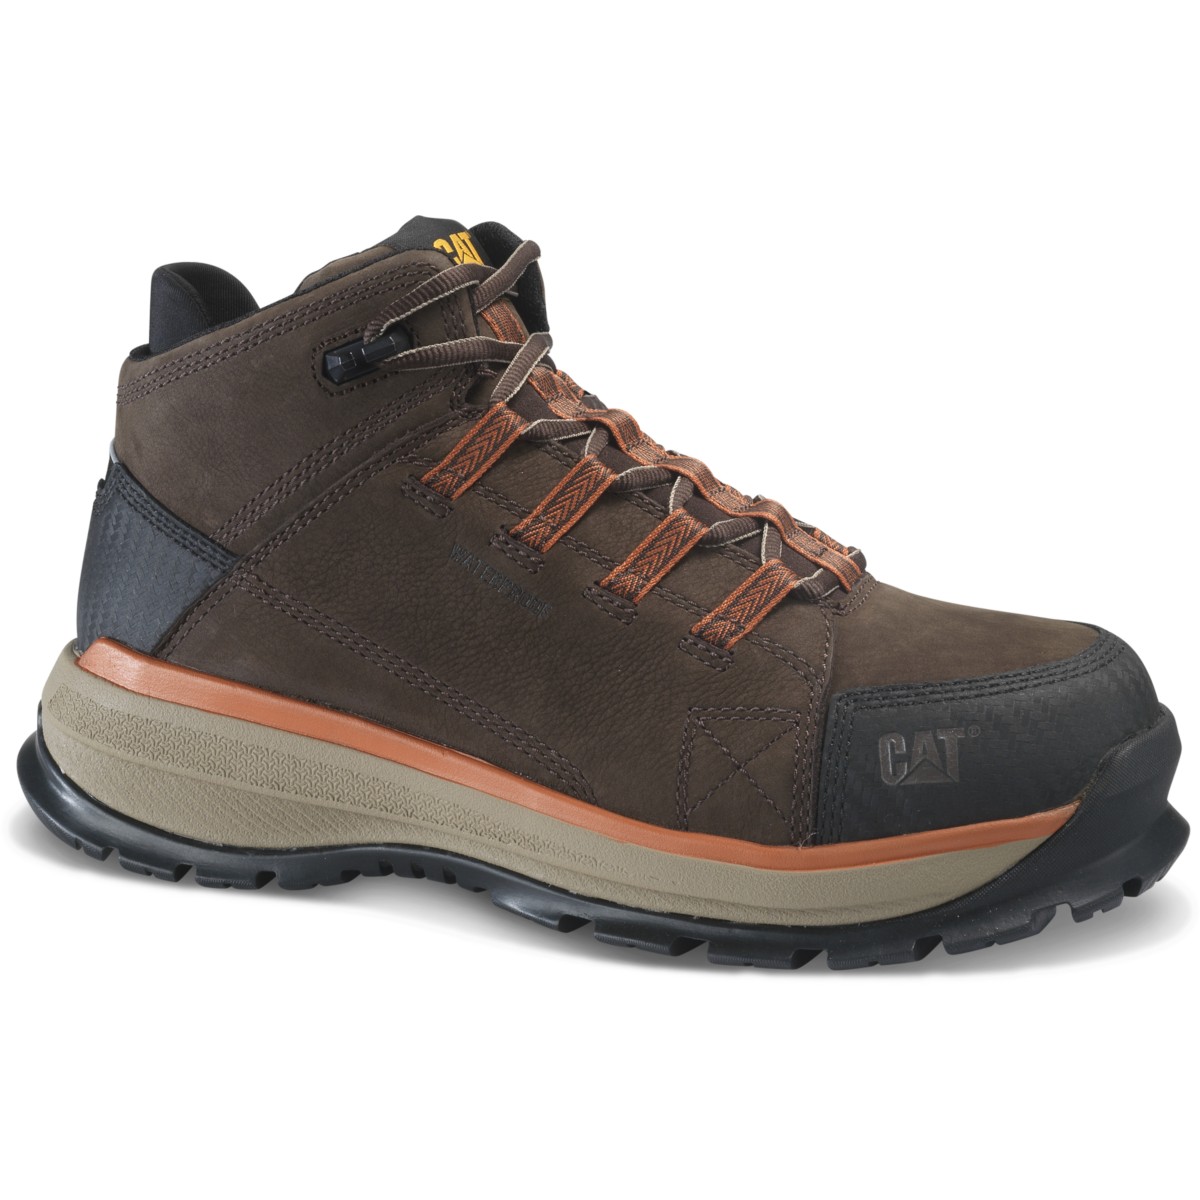 Buy > caterpillar lightweight safety boots > in stock